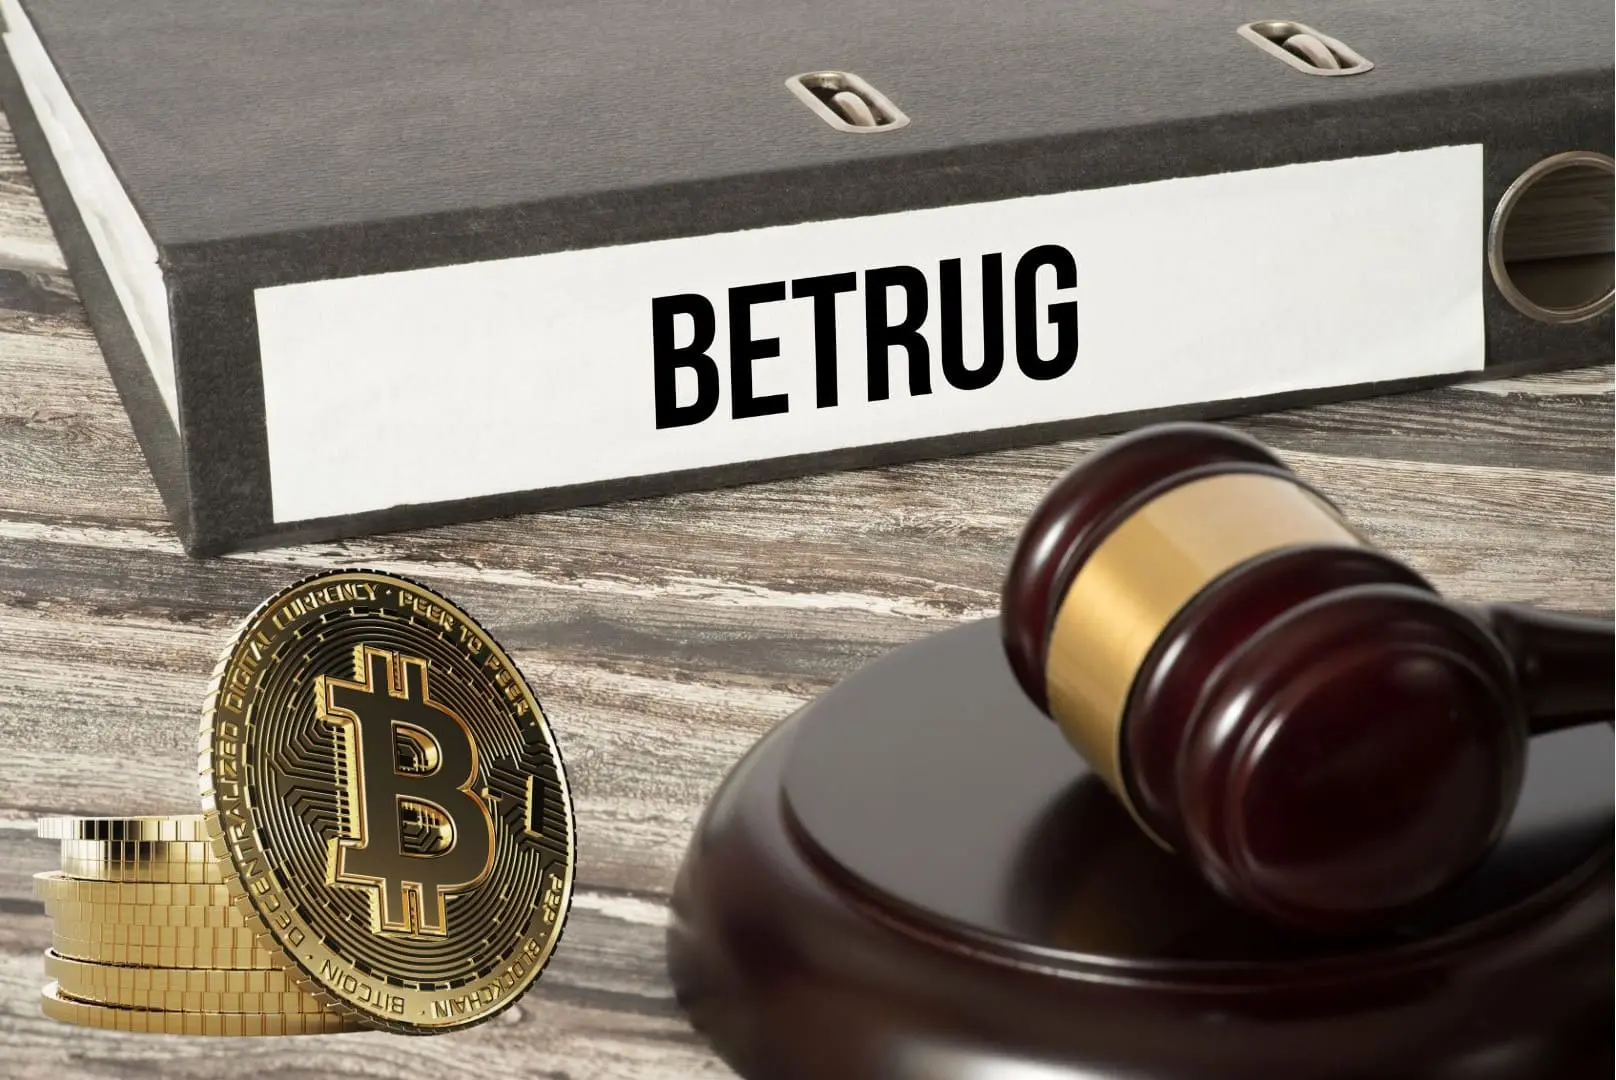 Alleged Misappropriation of BTC: Federal Officer in Court Over Cryptocurrency Theft